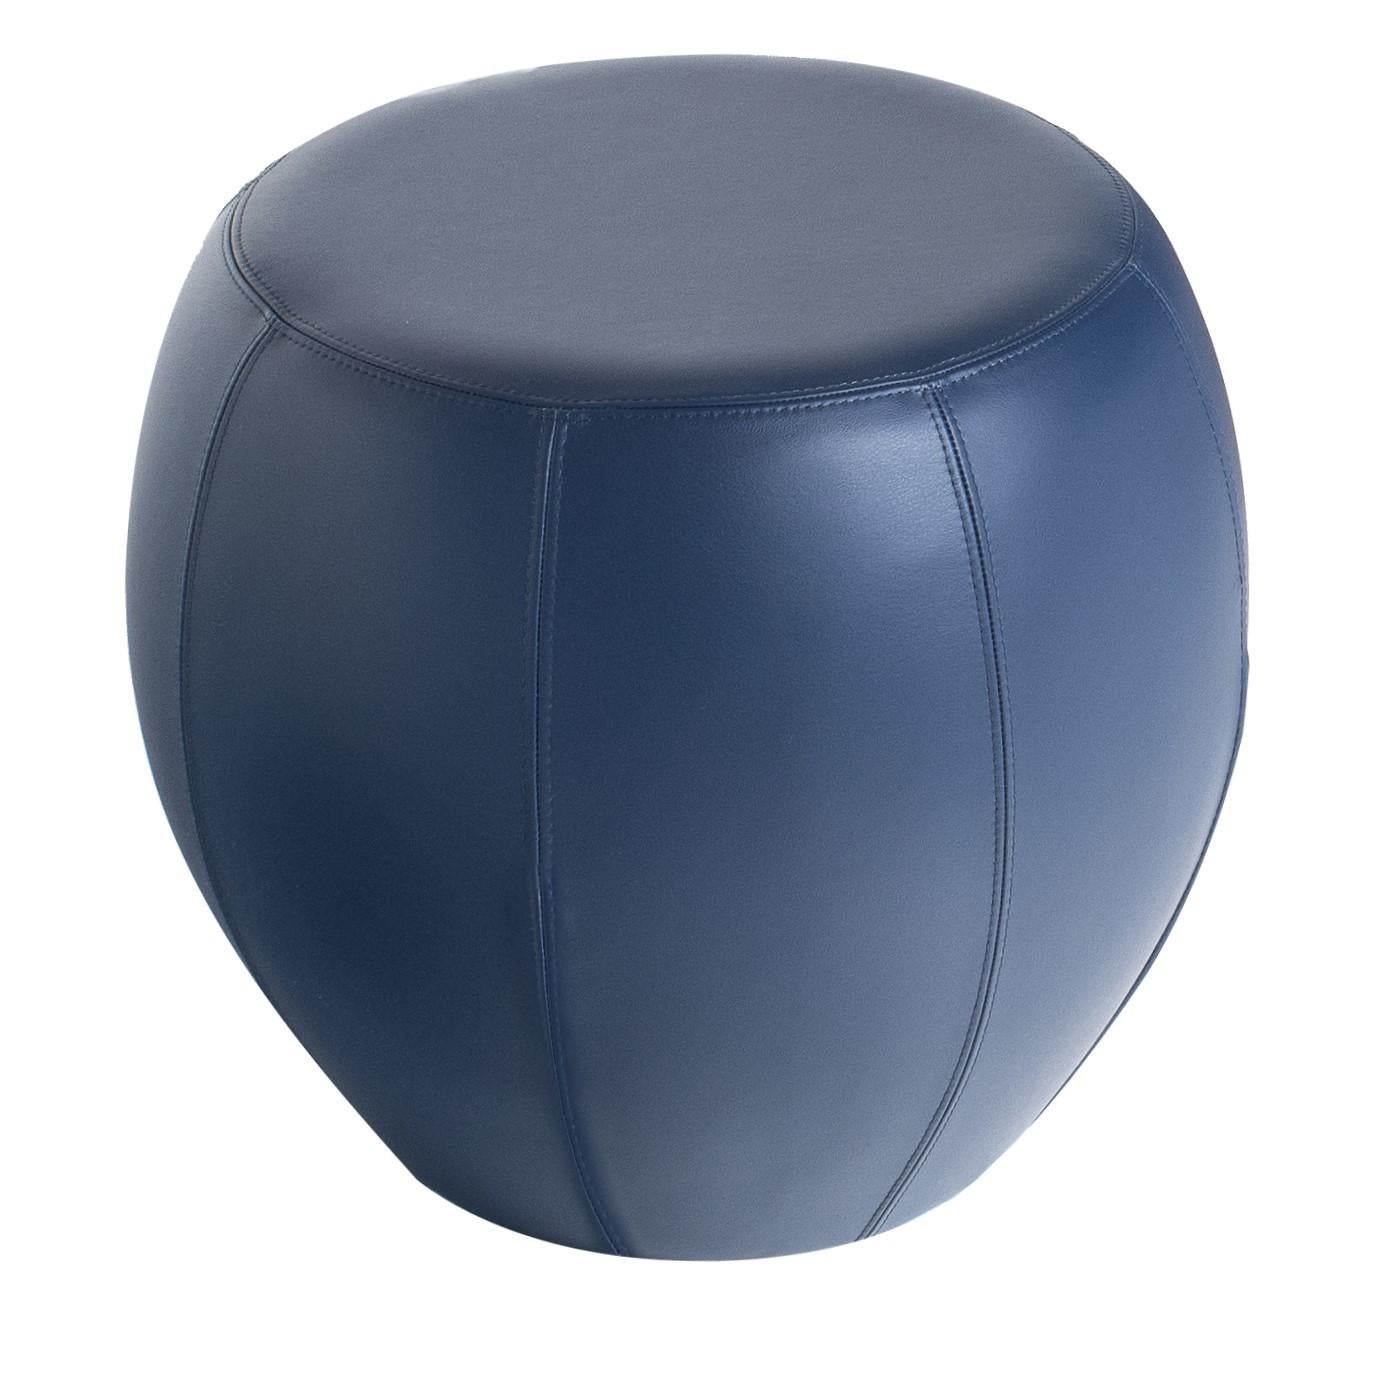 More than just your average pouf, the blue snoop pouf can also be used as a side table thanks to its flat top. Ideal as extra seating or as a decorative object, the pouf can be lined in leather, velvet or a modern fabric. The pouf is built on a